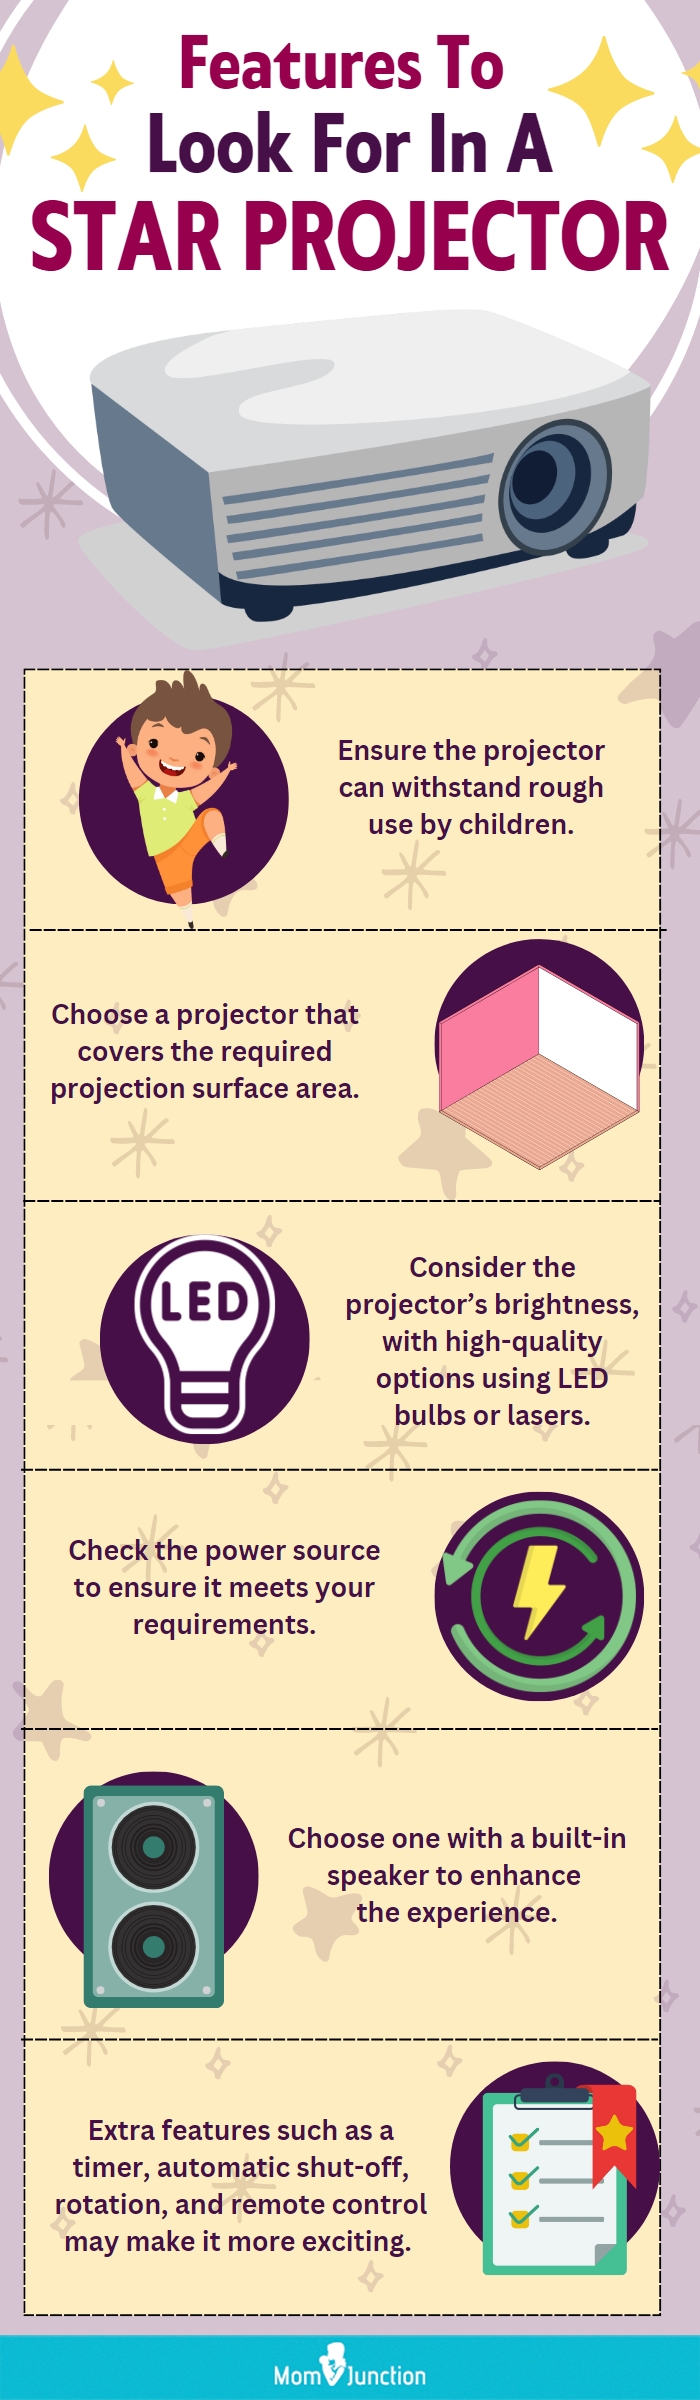 Features To Look For In A Star Projector (infographic)